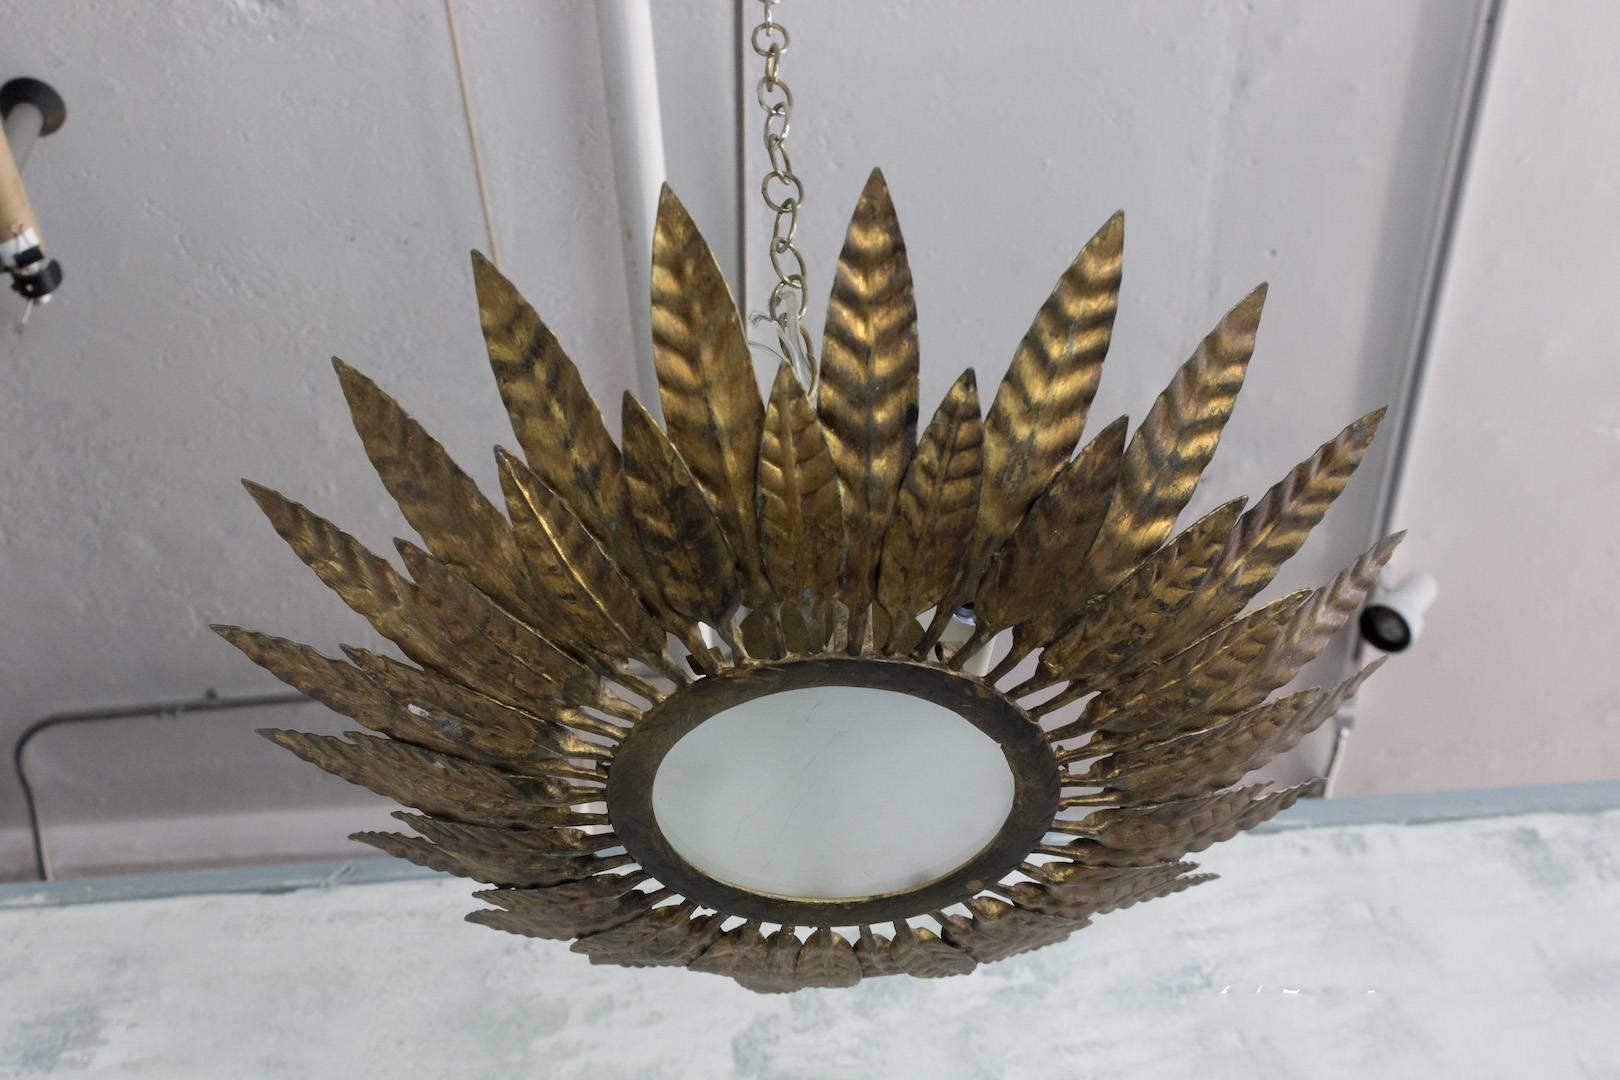 A spectacular Spanish 1950s gilt metal ceiling fixture with a double layer of leaf motifs. This gilt metal ceiling fixture is truly eye-catching. It boasts a double layer of small and large alternating and partially overlapping leaf motifs, creating